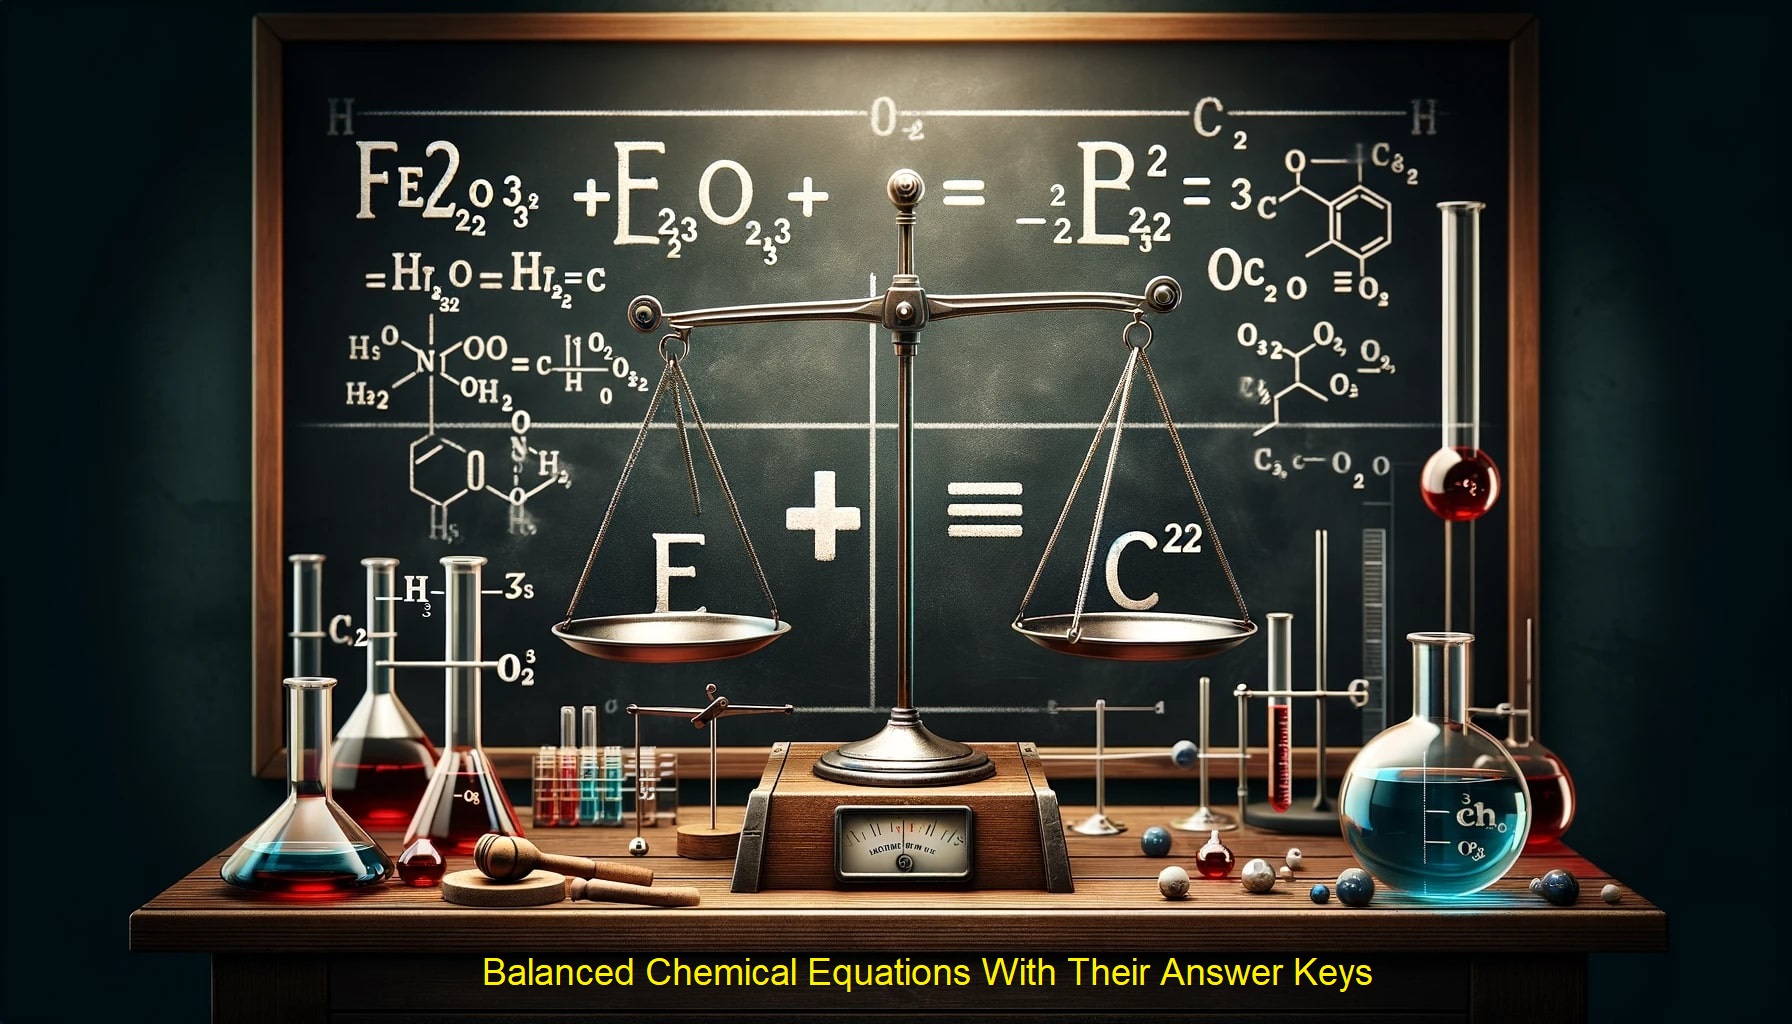 50 Balanced Chemical Equations With Their Answer Keys (Updated)